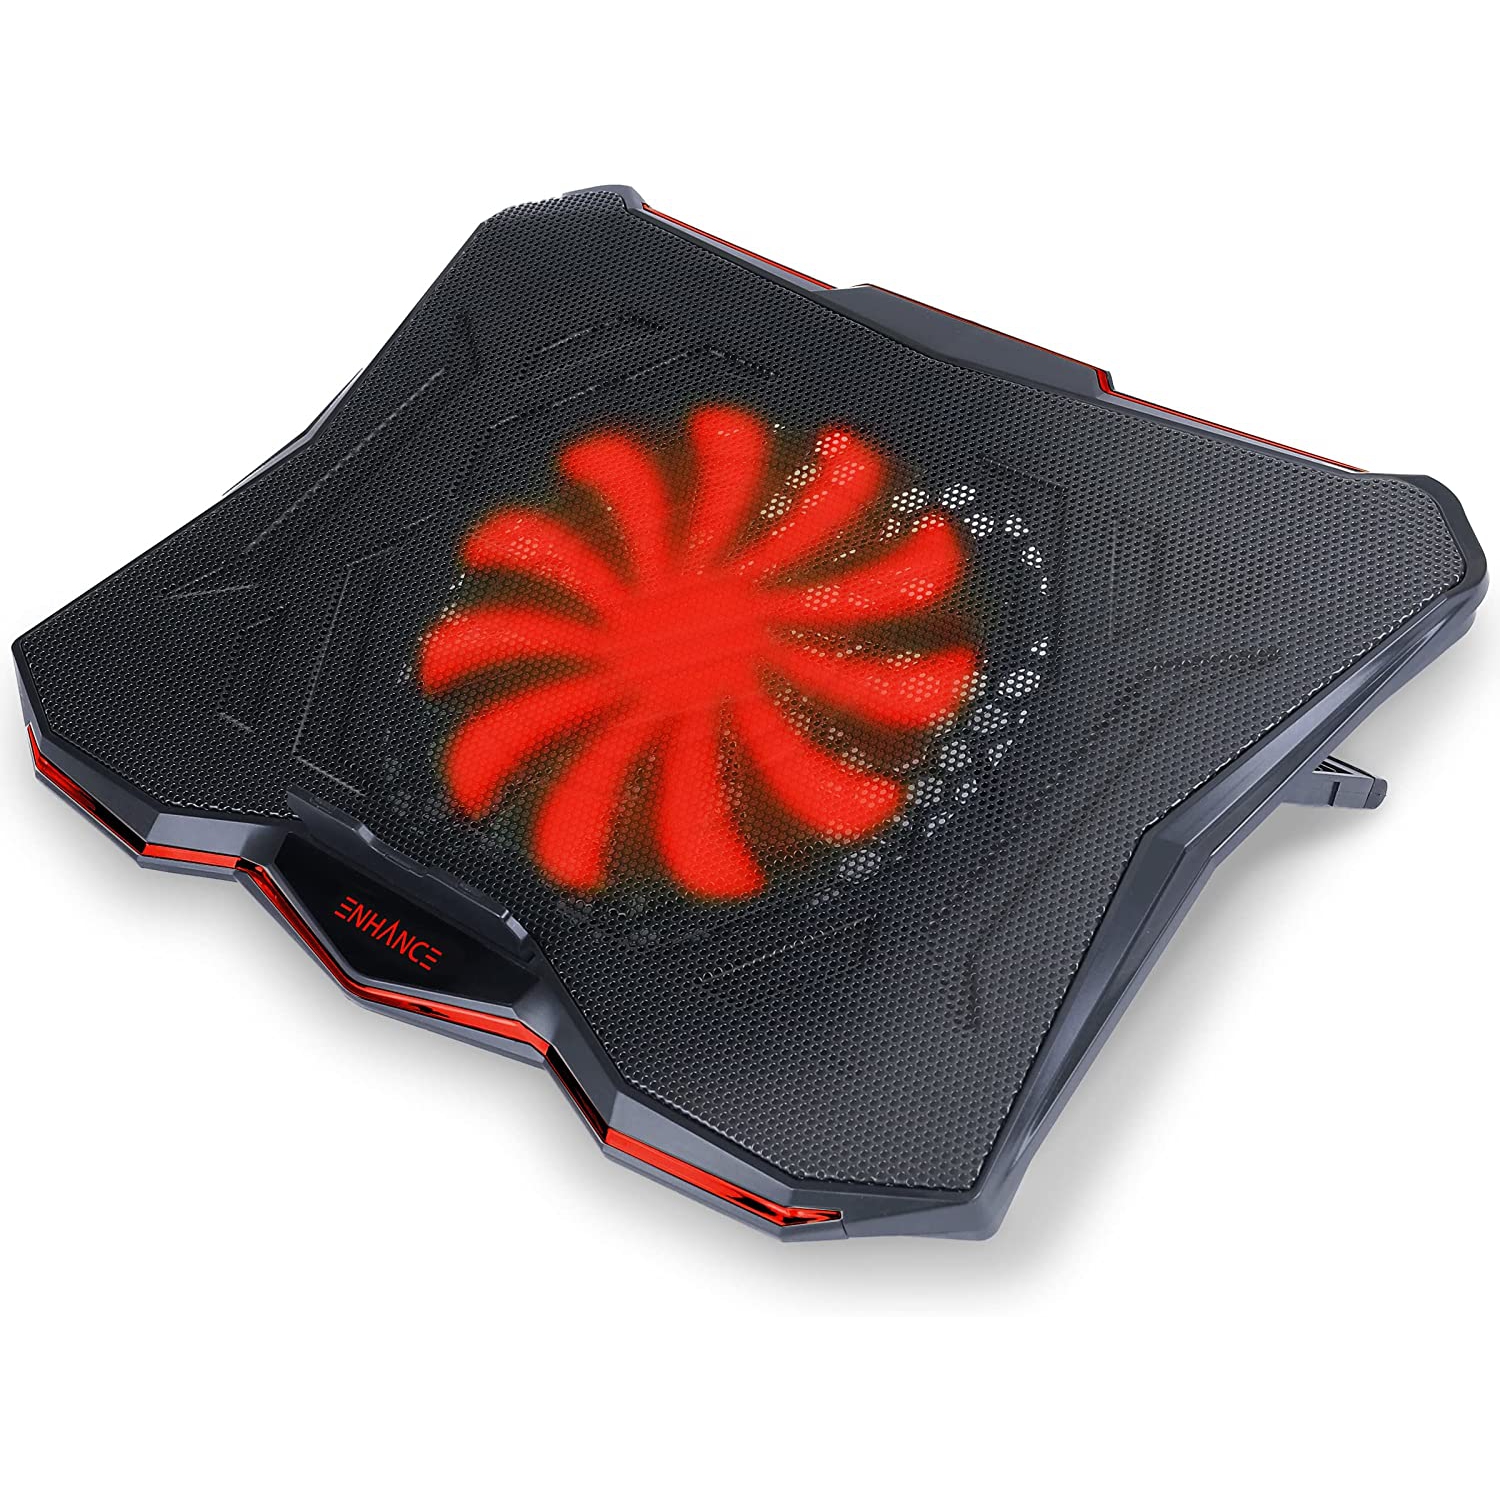 ENHANCE Cryogen 5 Gaming Laptop Cooling Pad Stand - Laptop Cooler with 7 Adjustable Height & Dual USB Ports for 17 inch Laptops - High Performance LED Laptop Fan 800 RPM - Red